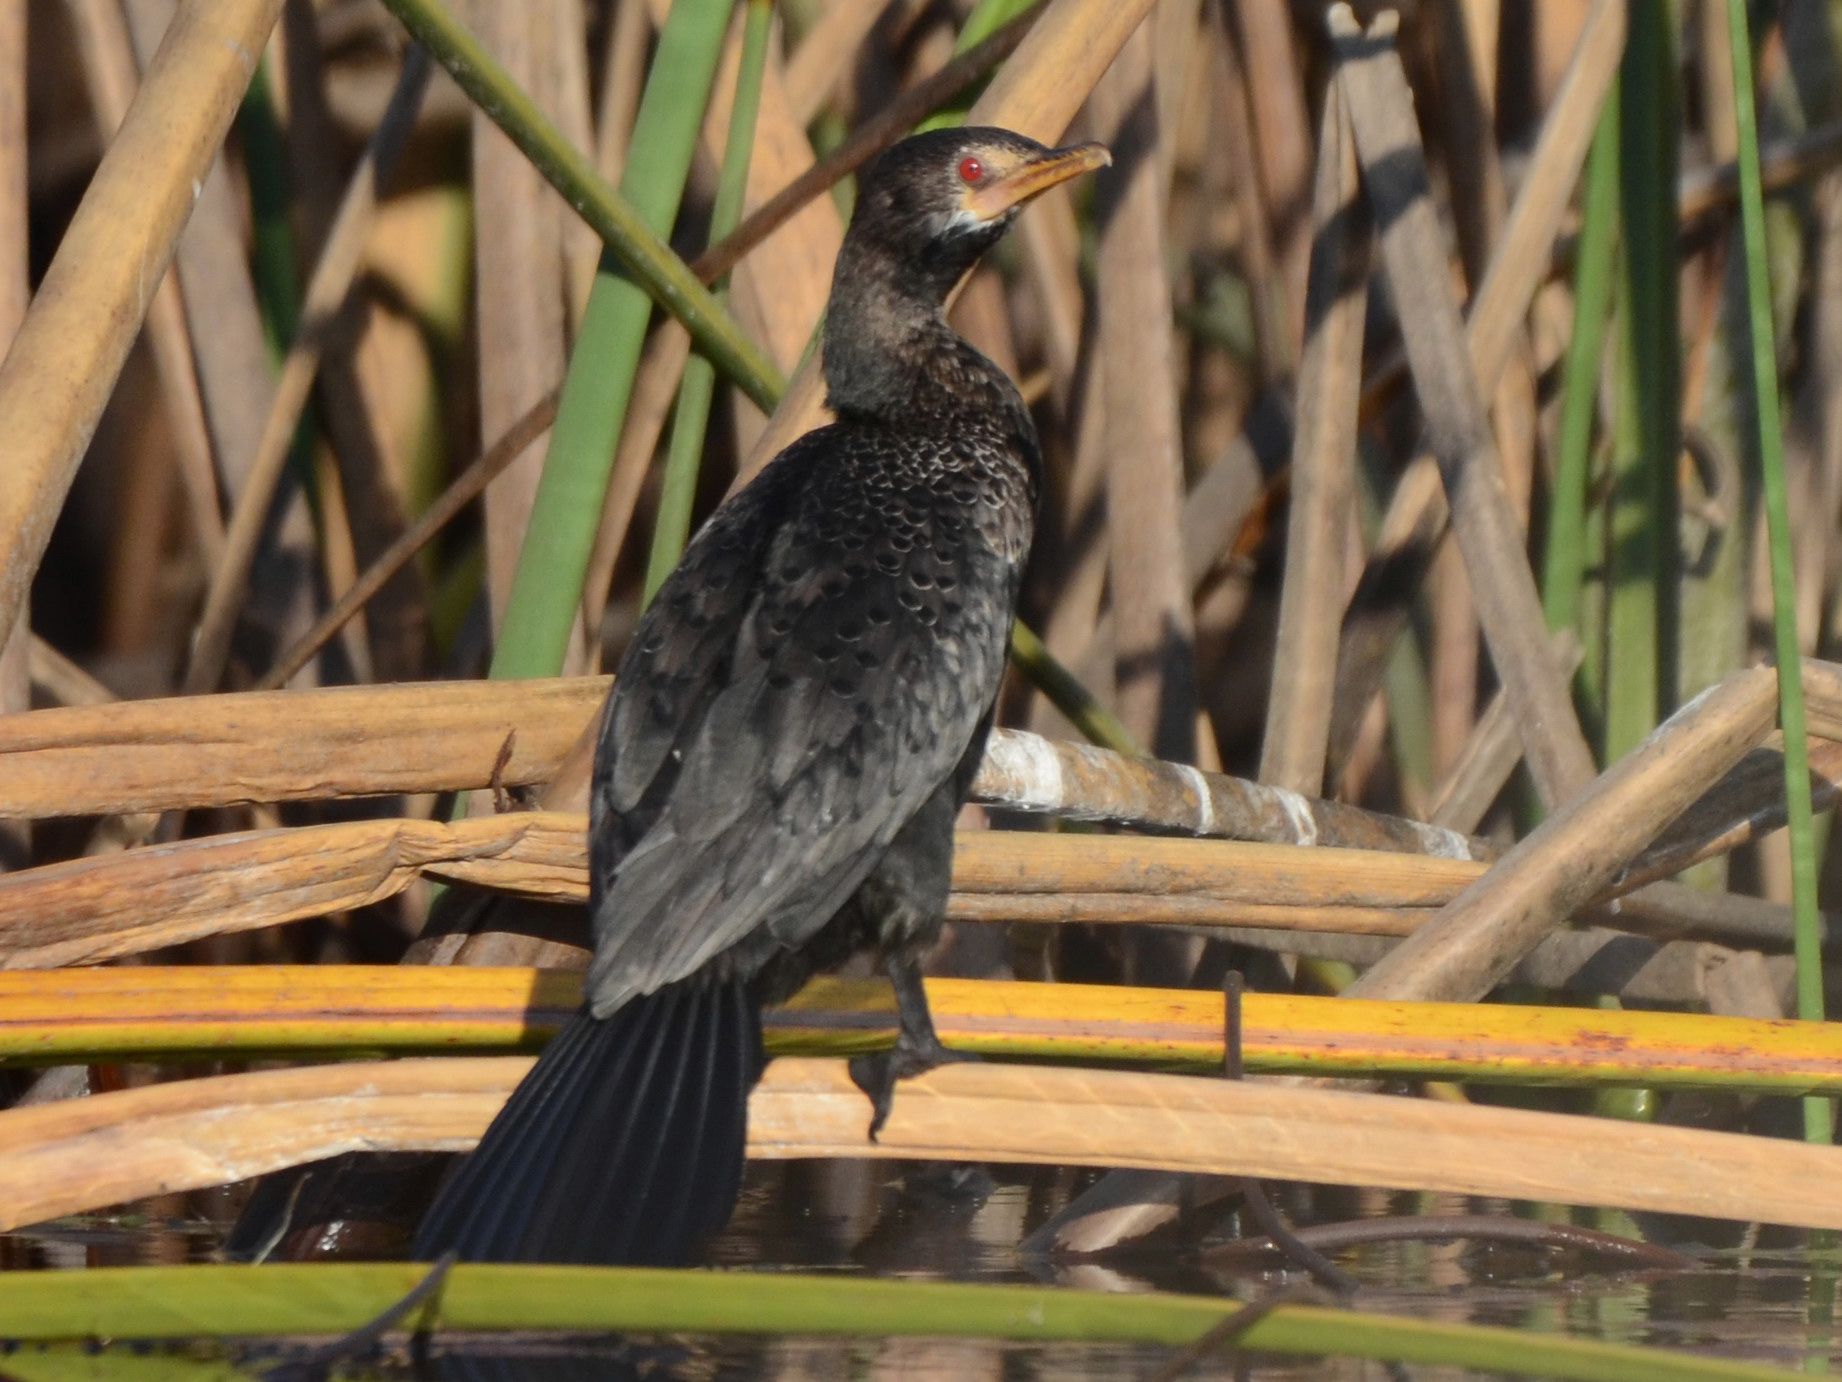 Click picture to see more Reed Cormorants.